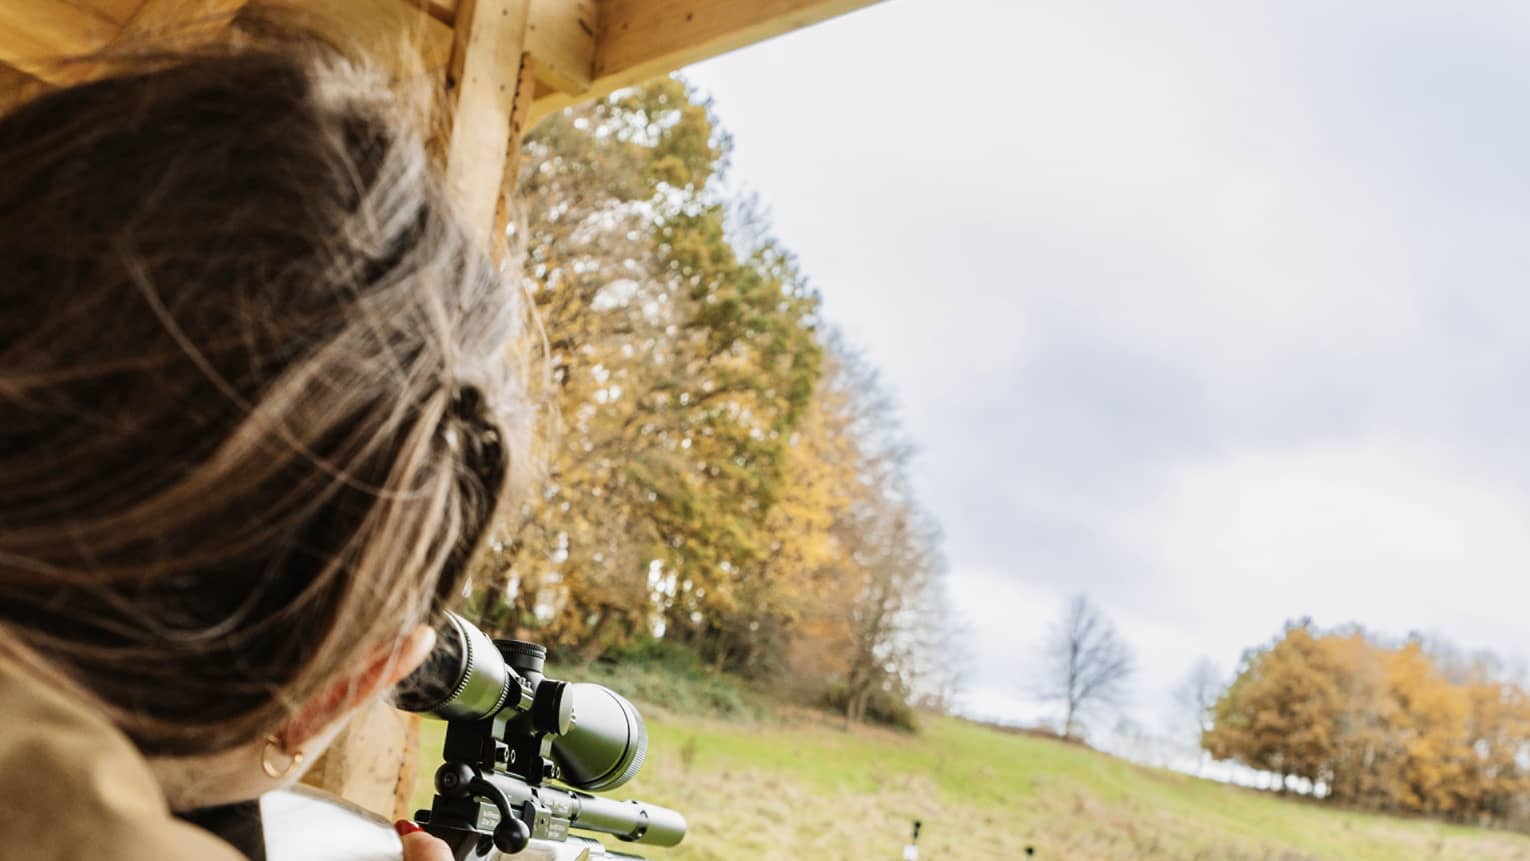 Rear view of a person in a brown jacket aiming an air rifle at small, distant targets in a large field amid autumn trees.